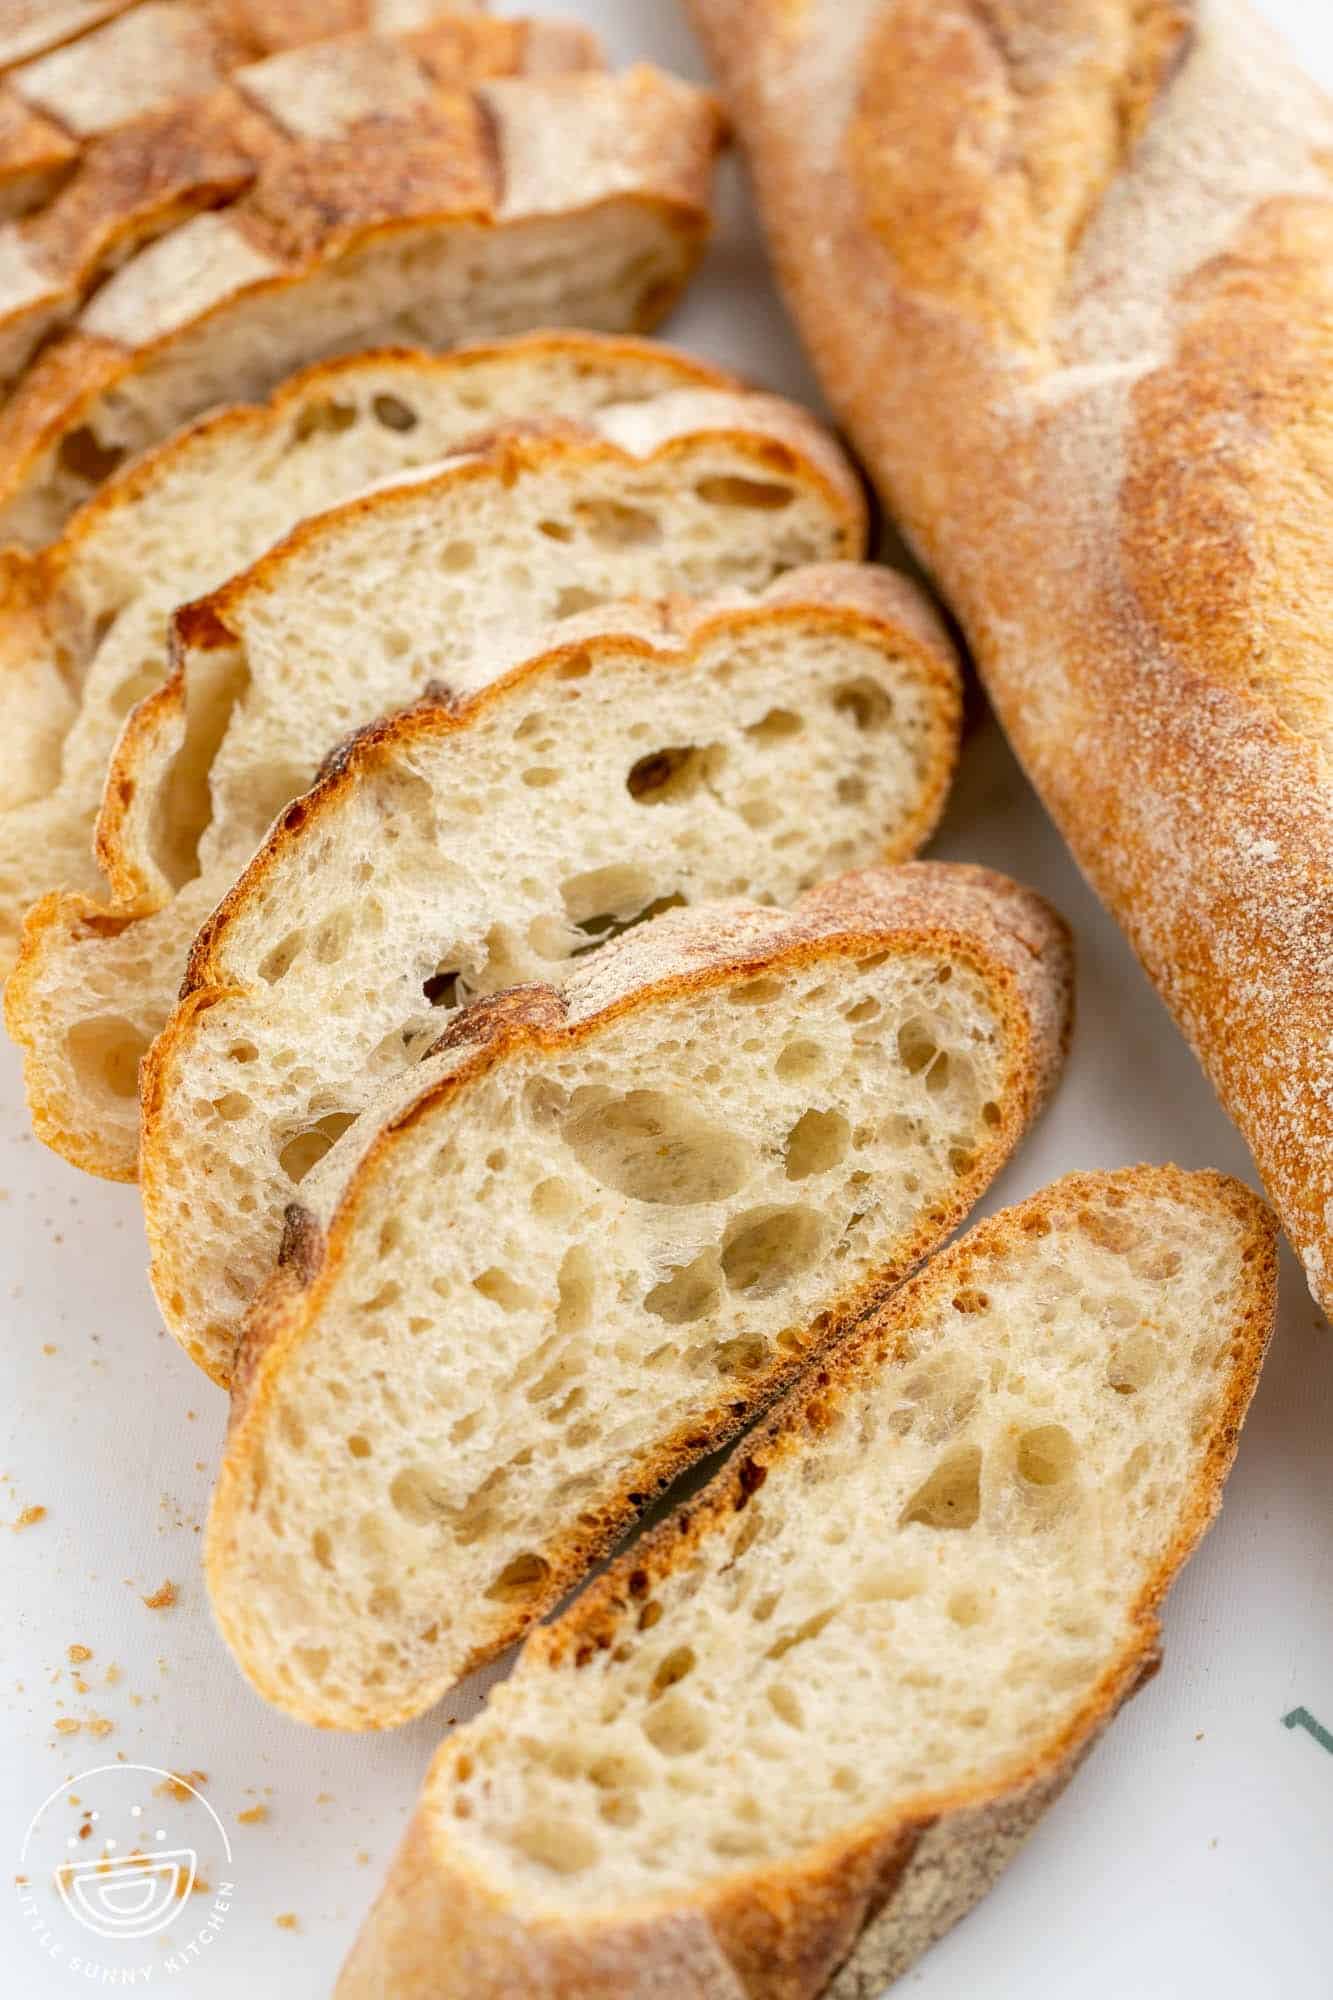 a baguette sliced into thin rounds for crostini